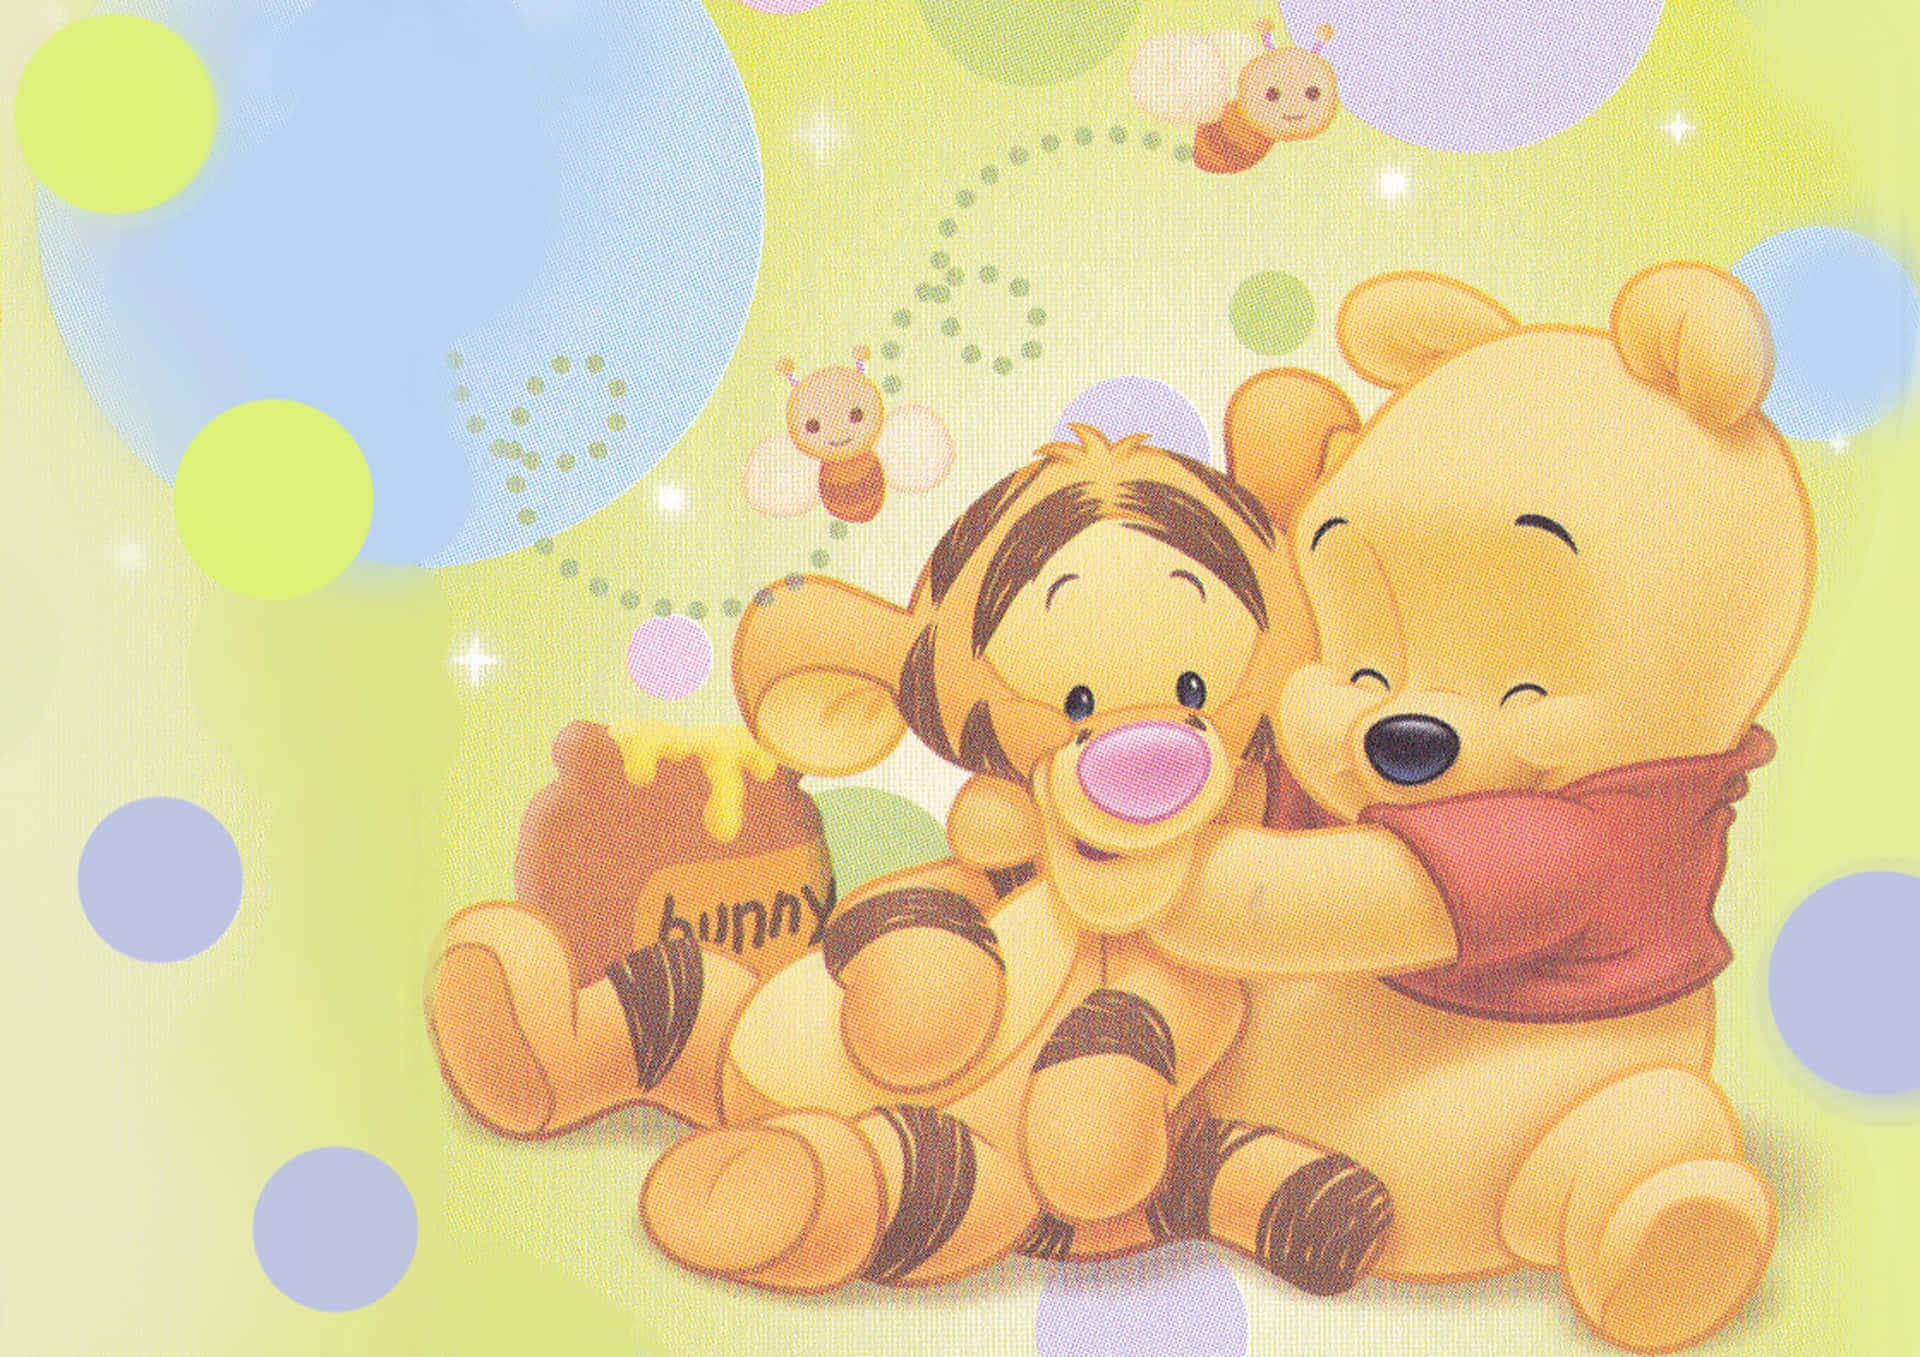 An Adorable Desktop Wallpaper With Winnie The Pooh